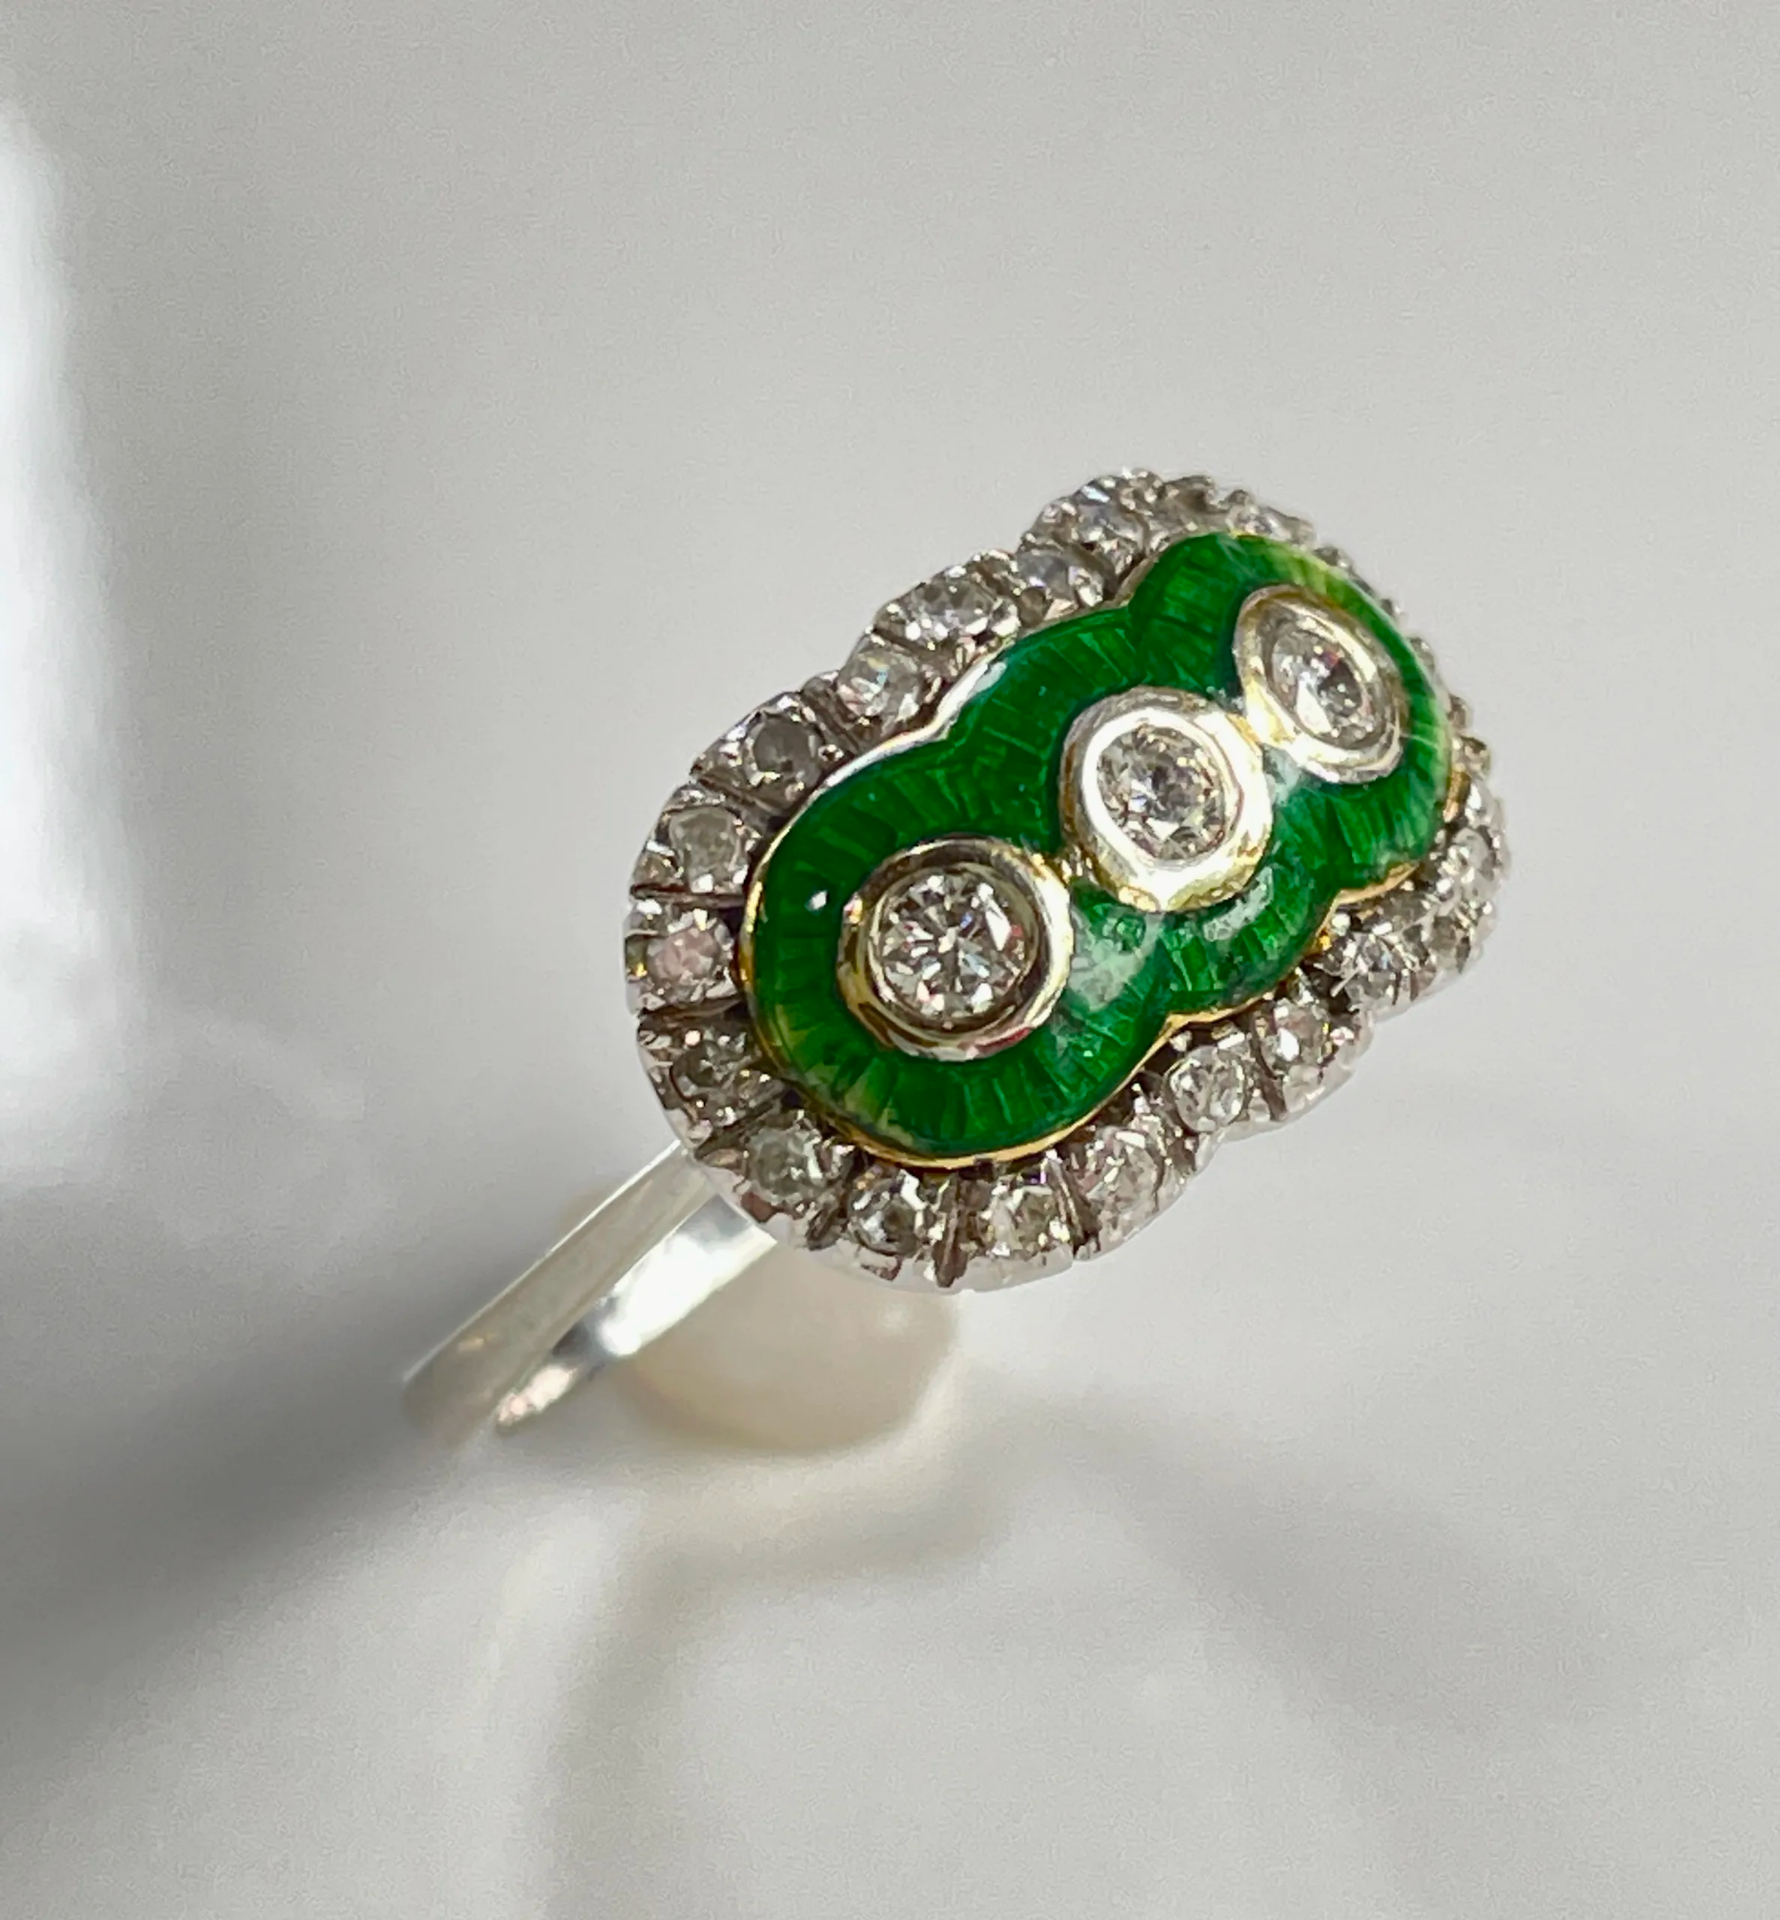 Antique Art Deco Ring 18K Gold with Diamonds and Enamel - Image 3 of 4